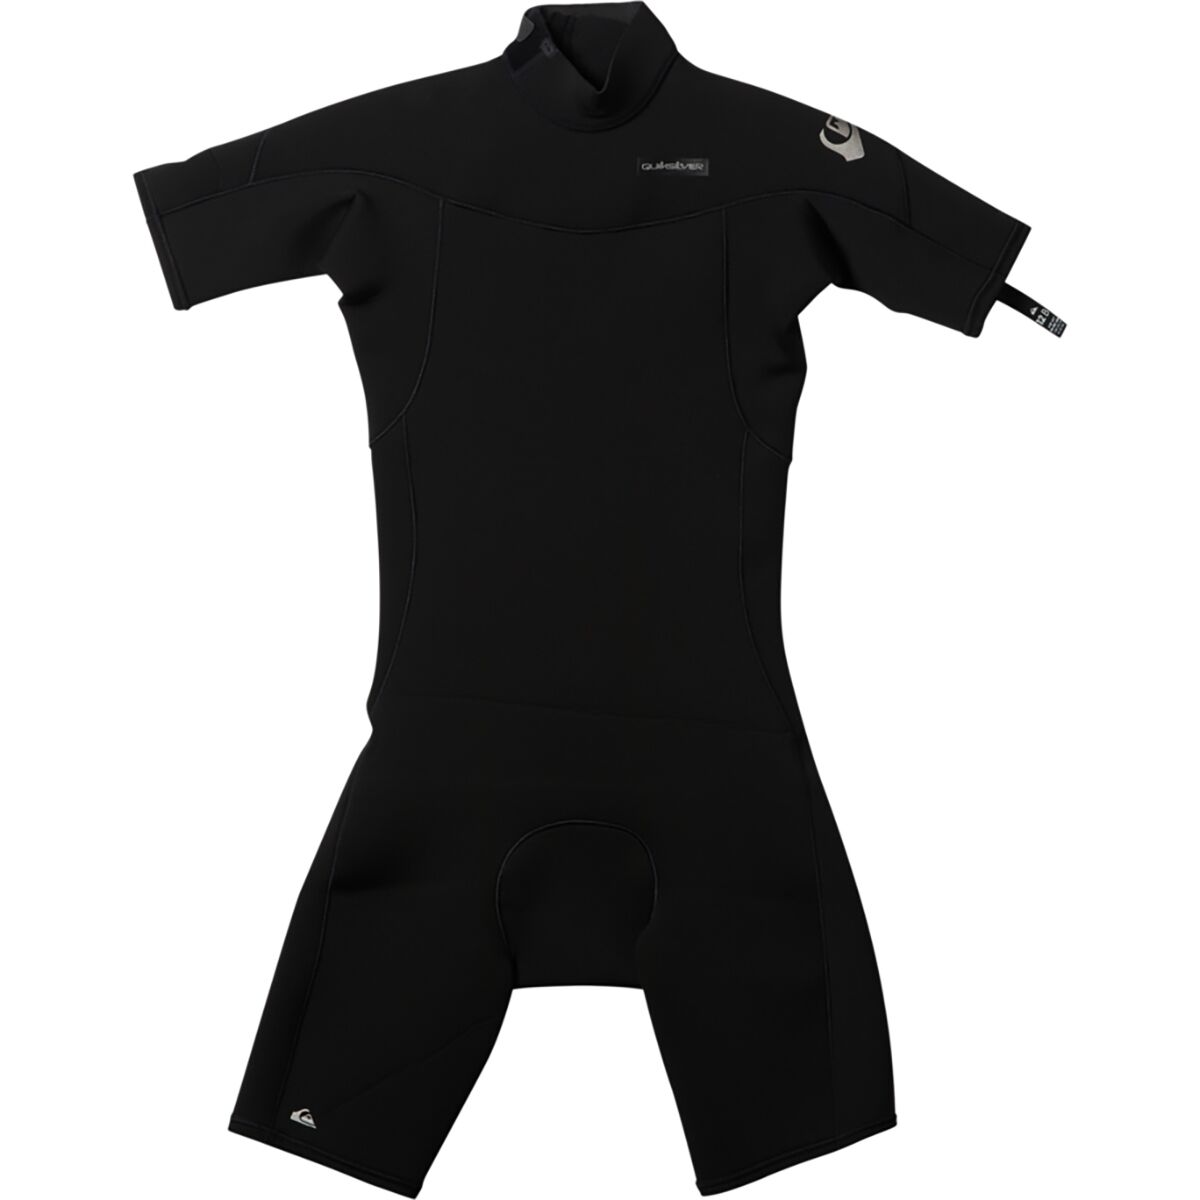 Quiksilver Everyday Sessions 2/2 SS Back Zip Wetsuit - Kids'